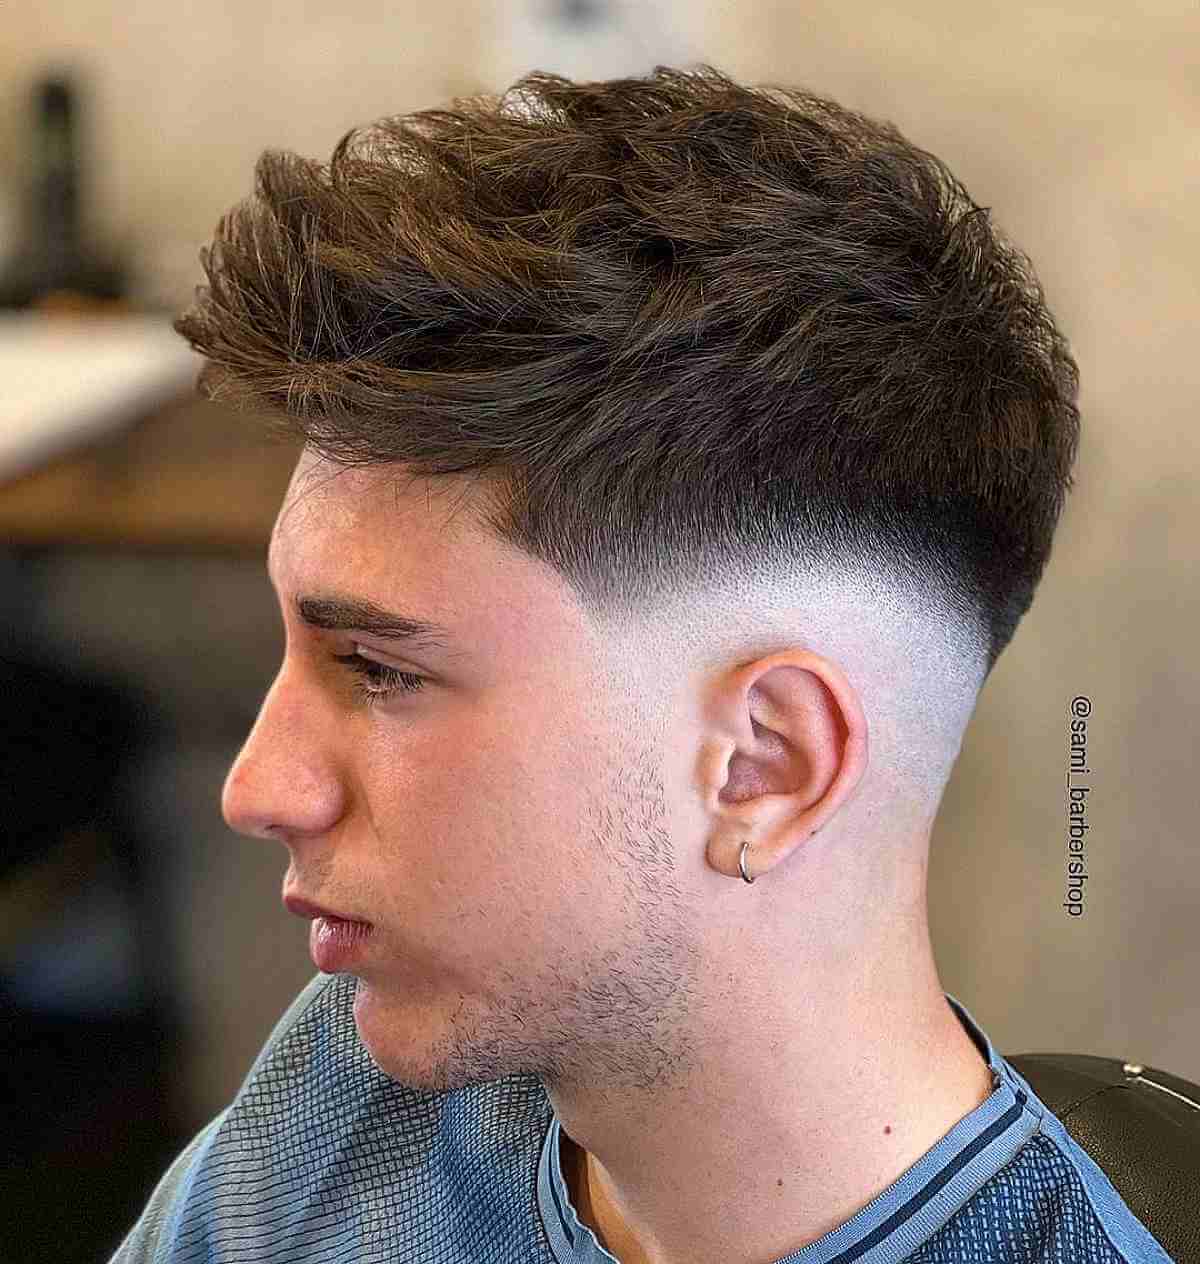 Amazing Textured Mid-Fade Haircut for Men